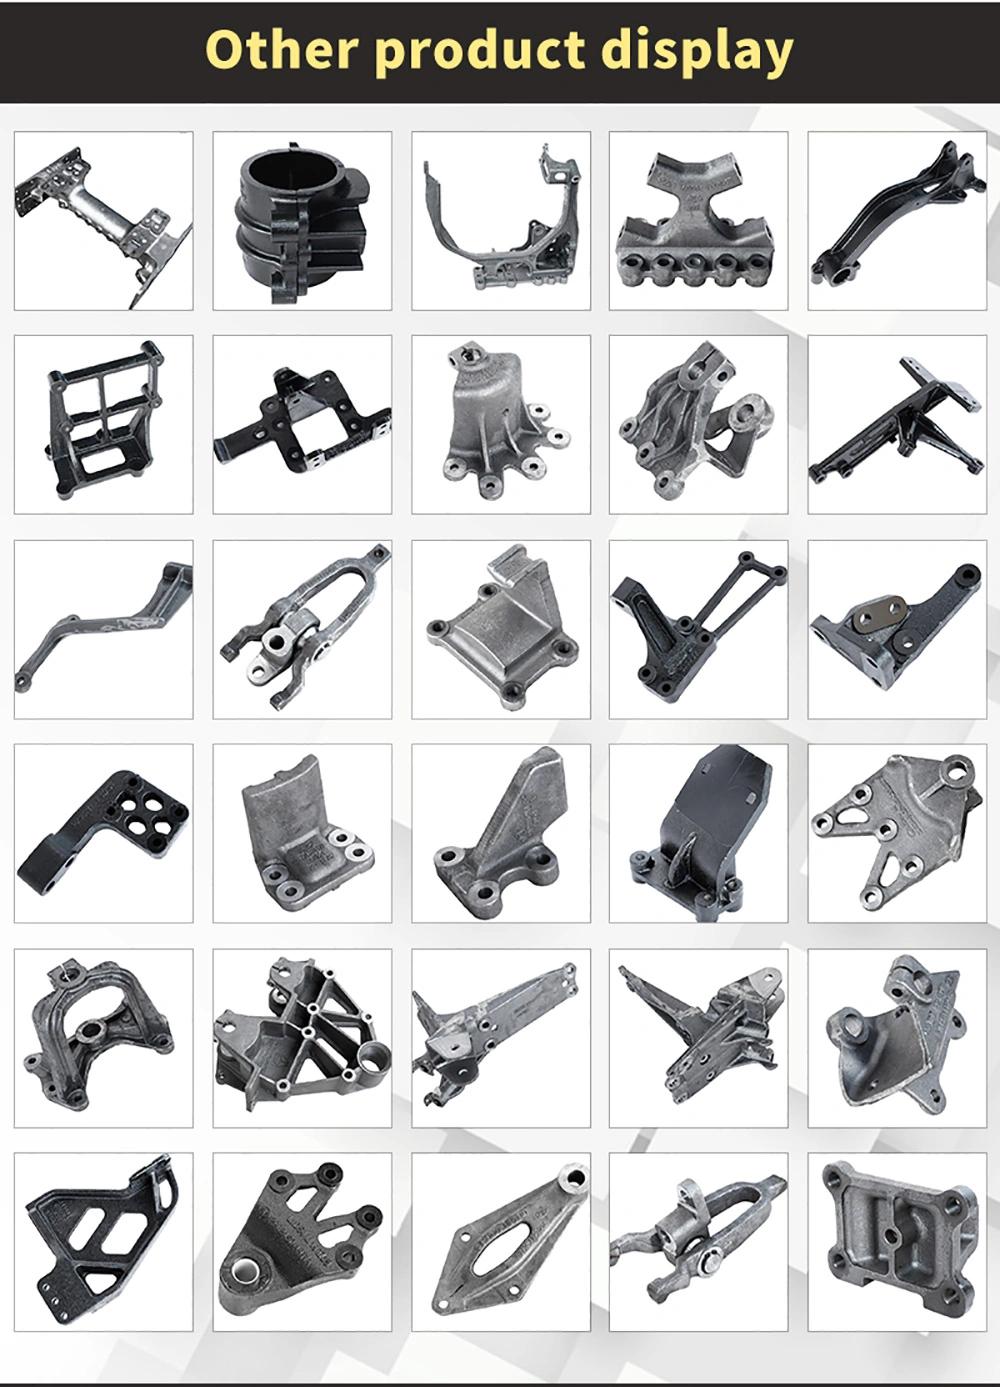 High-Quality OEM Customized Truck Parts, Stamping Parts, Ductile Iron, Laser Cutting Services, Sand Castings